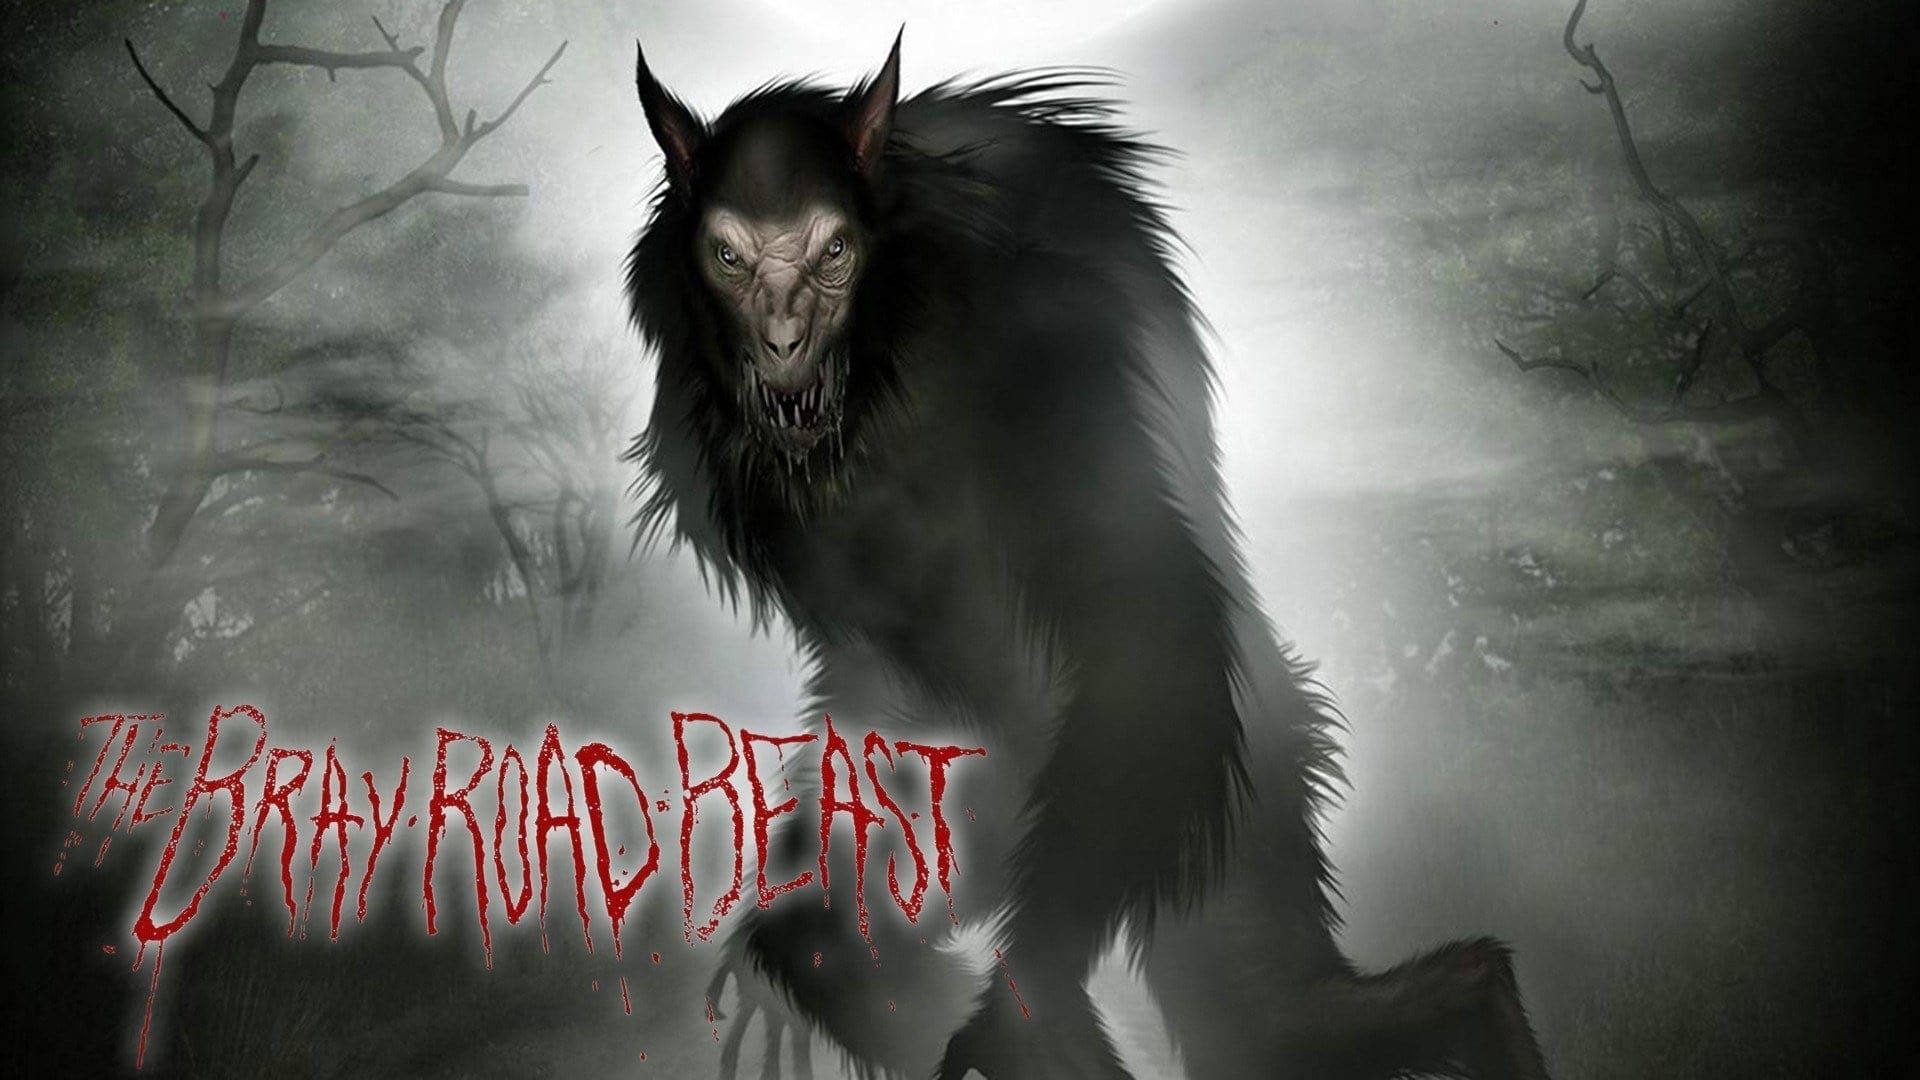 The Bray Road Beast background